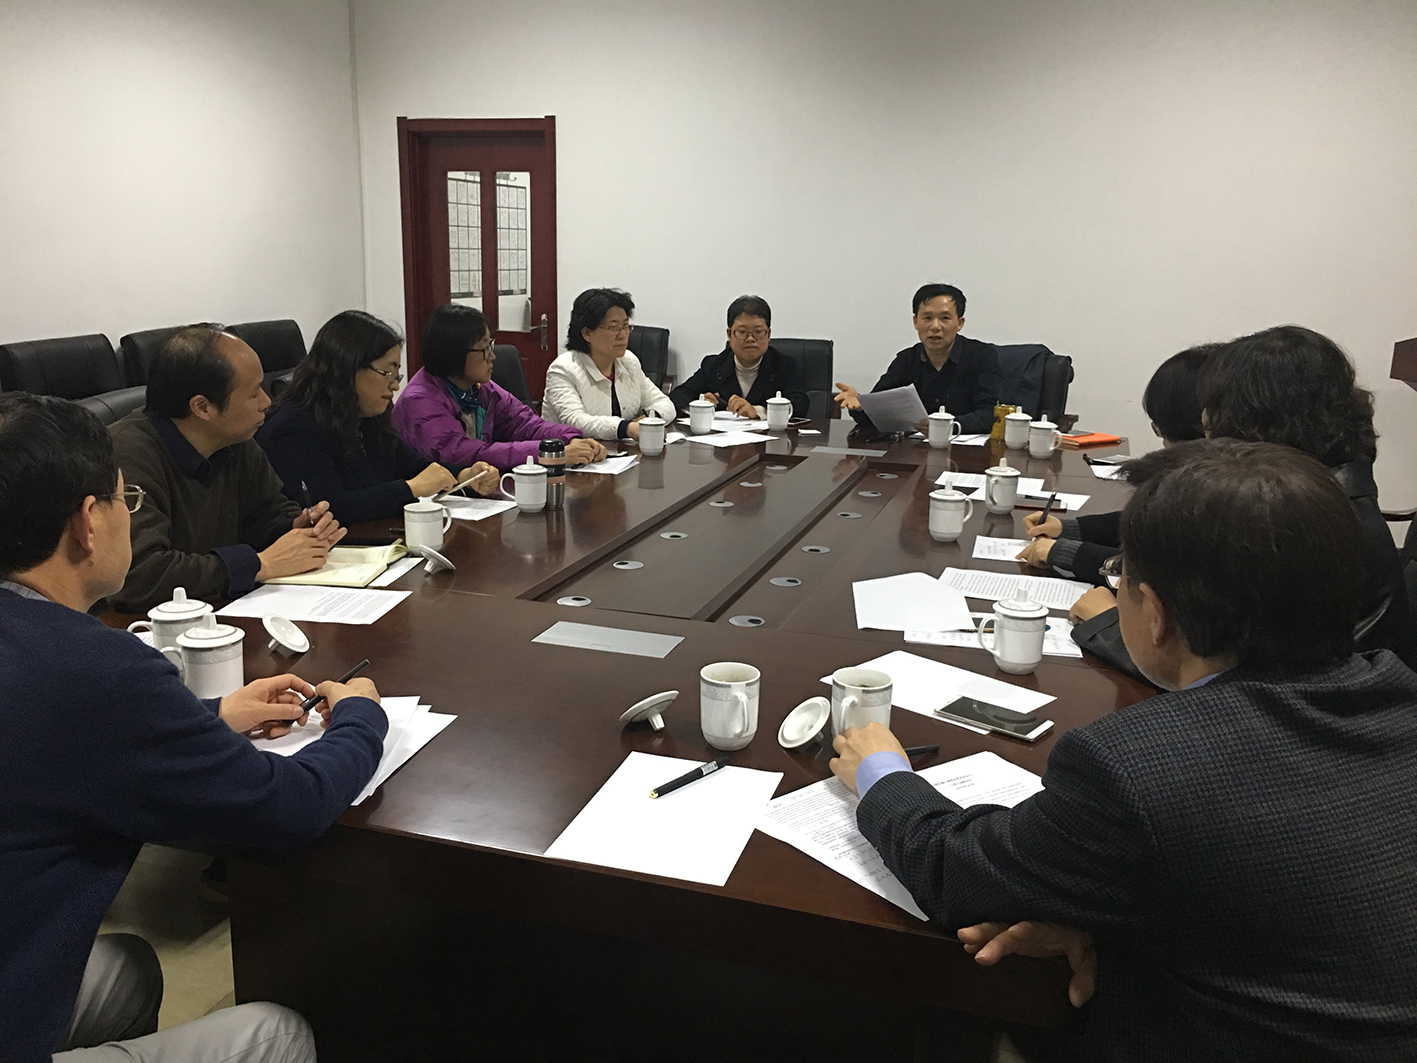 Stem cell development in Shanxi Province round table meeting was hold by IBMS